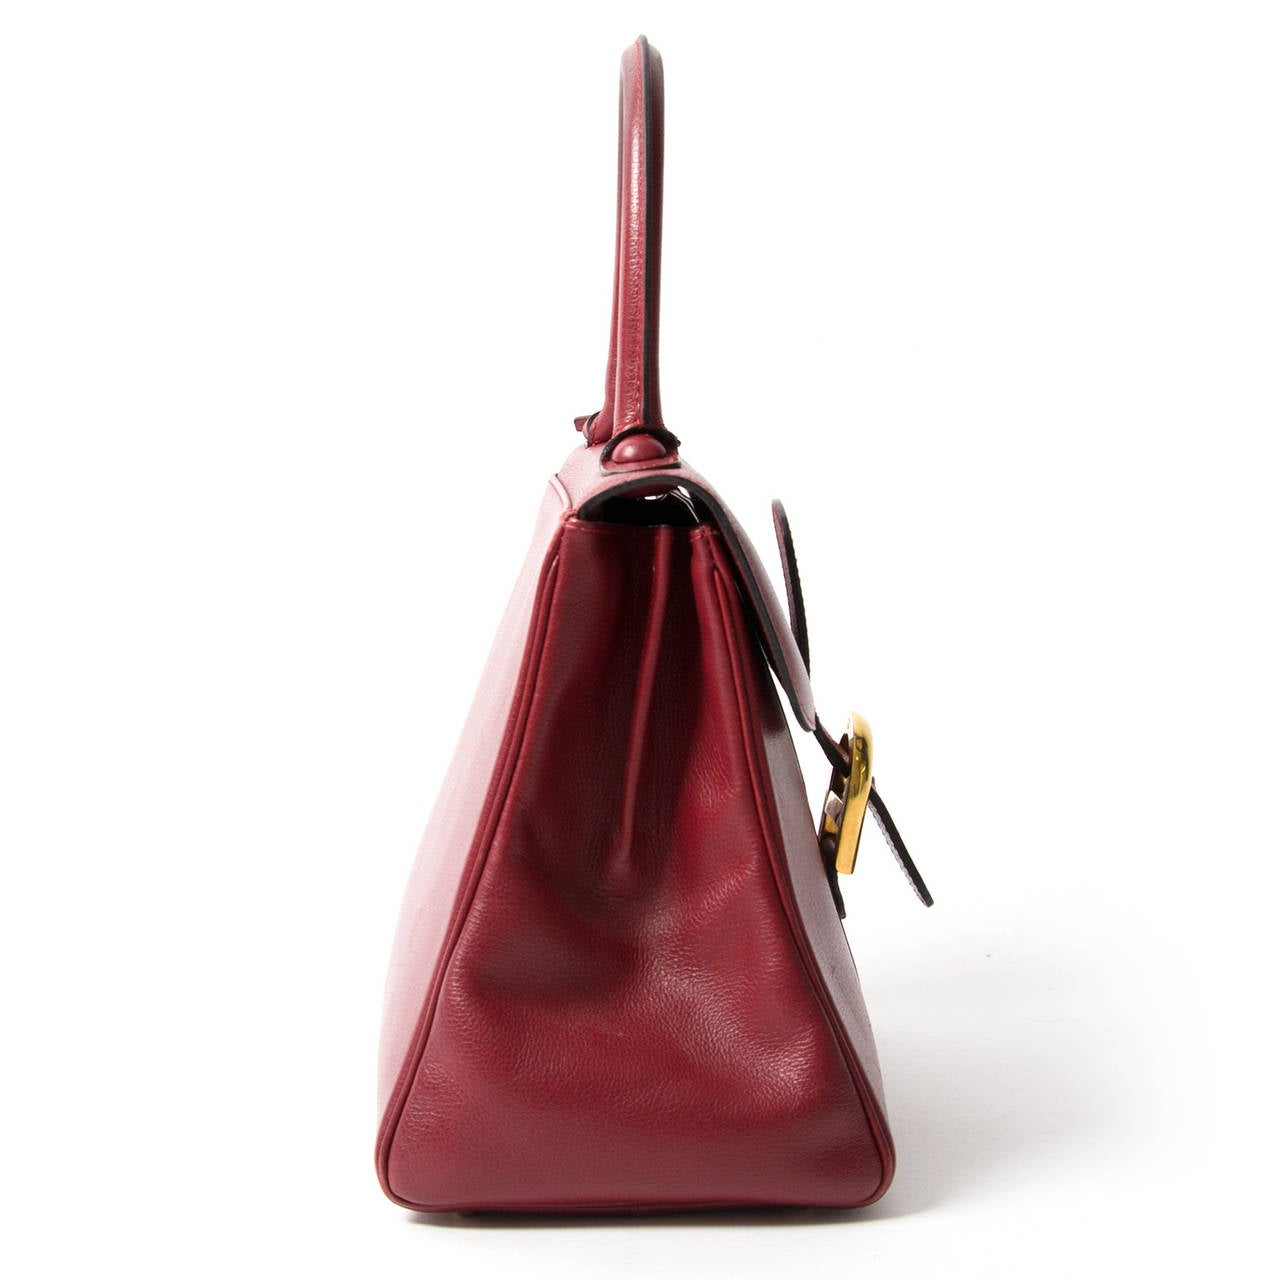 Delvaux Brillant Bordeaux MM with gold hardware in blood red grained calsfkin leather.
This classic satchel from premium Belgium luxury leather goods House Delvaux excels in both style and quality.

Top handle for comfortable and elegant use.